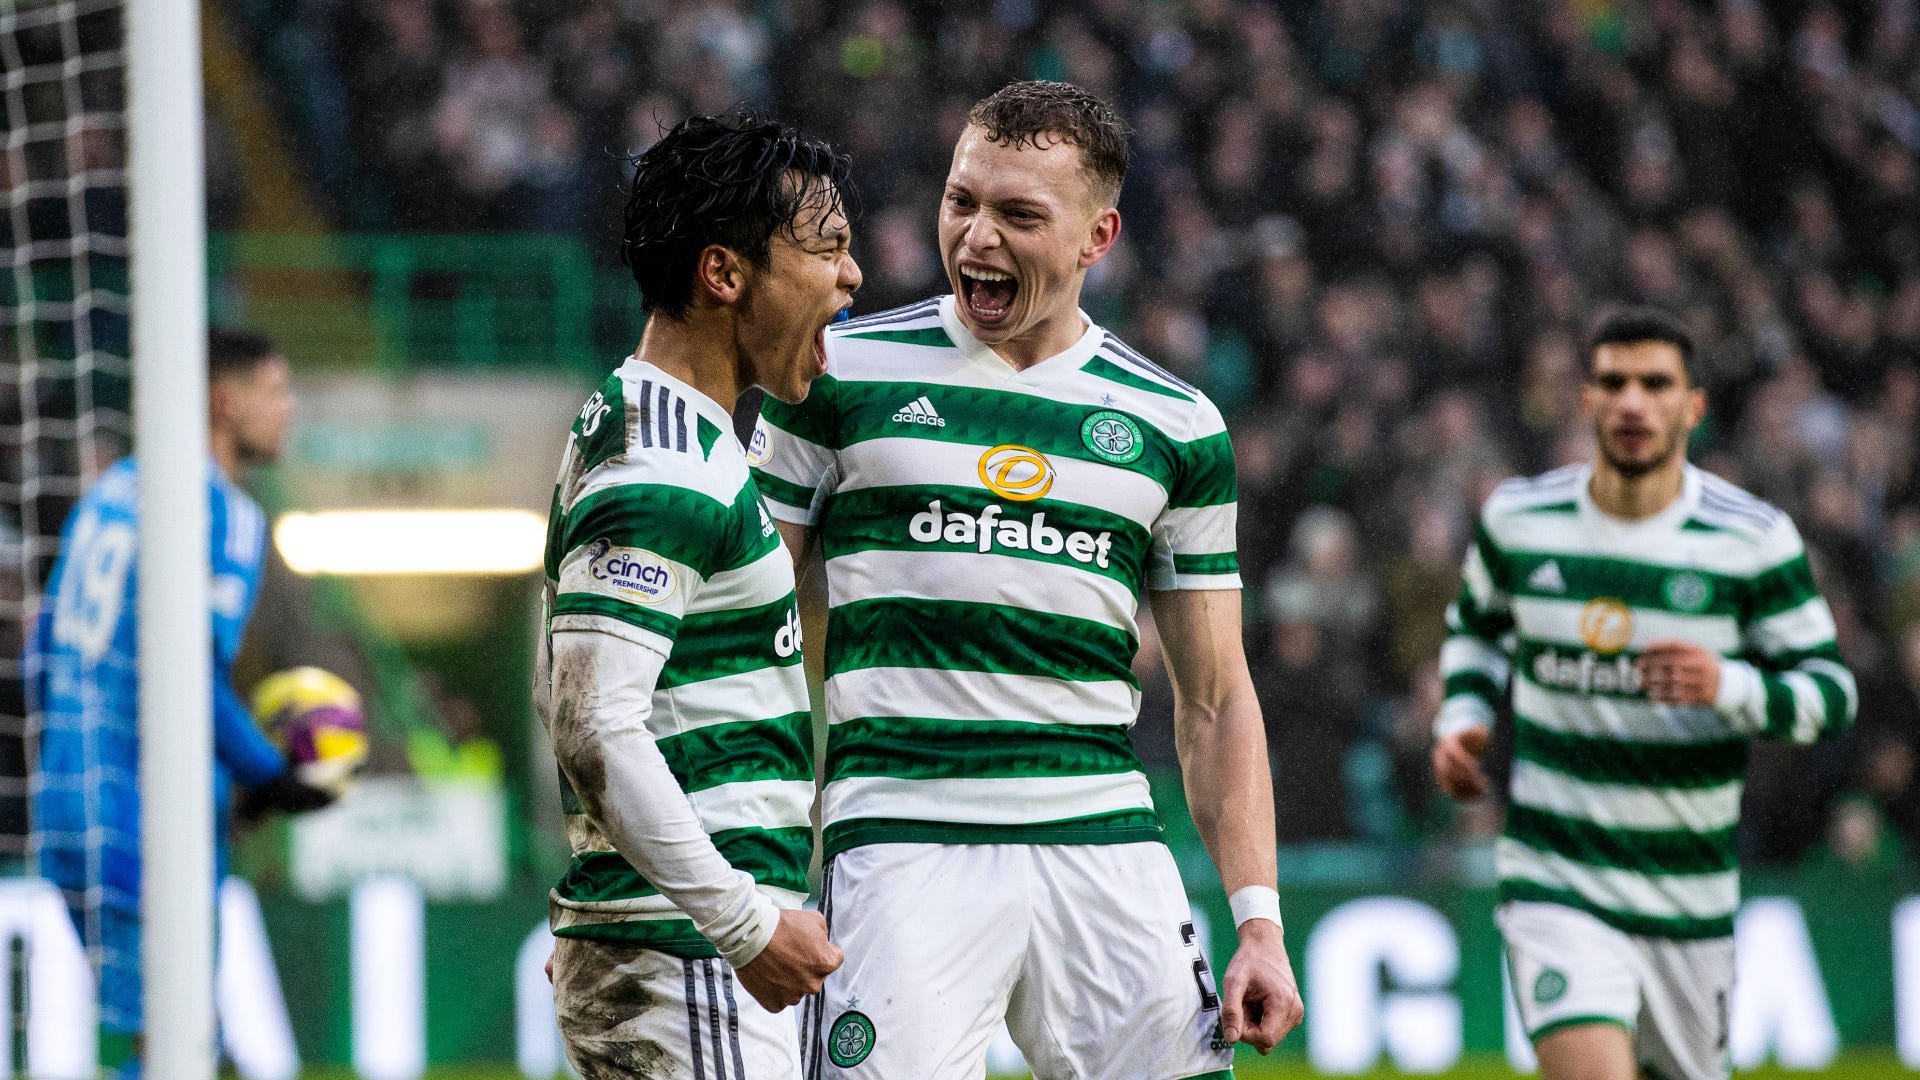 Ross County vs Celtic Where to watch the match online, live stream, TV channels and kick-off time Goal